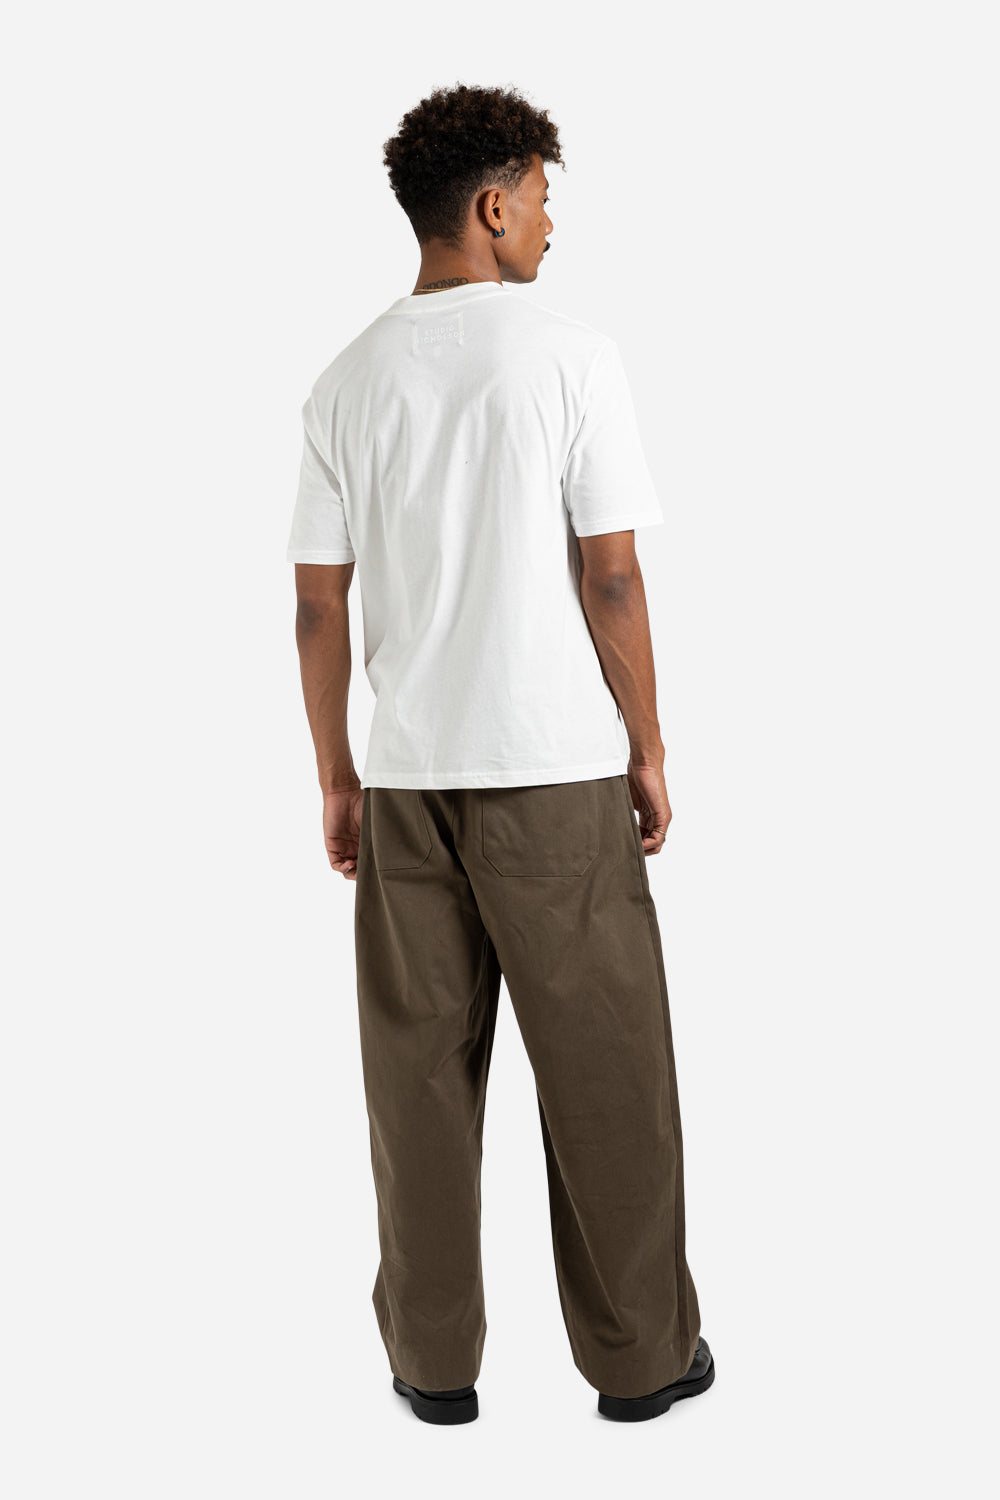 Studio Nicholson Acuna Pant in Nutmeg Curated at Jake and Jones